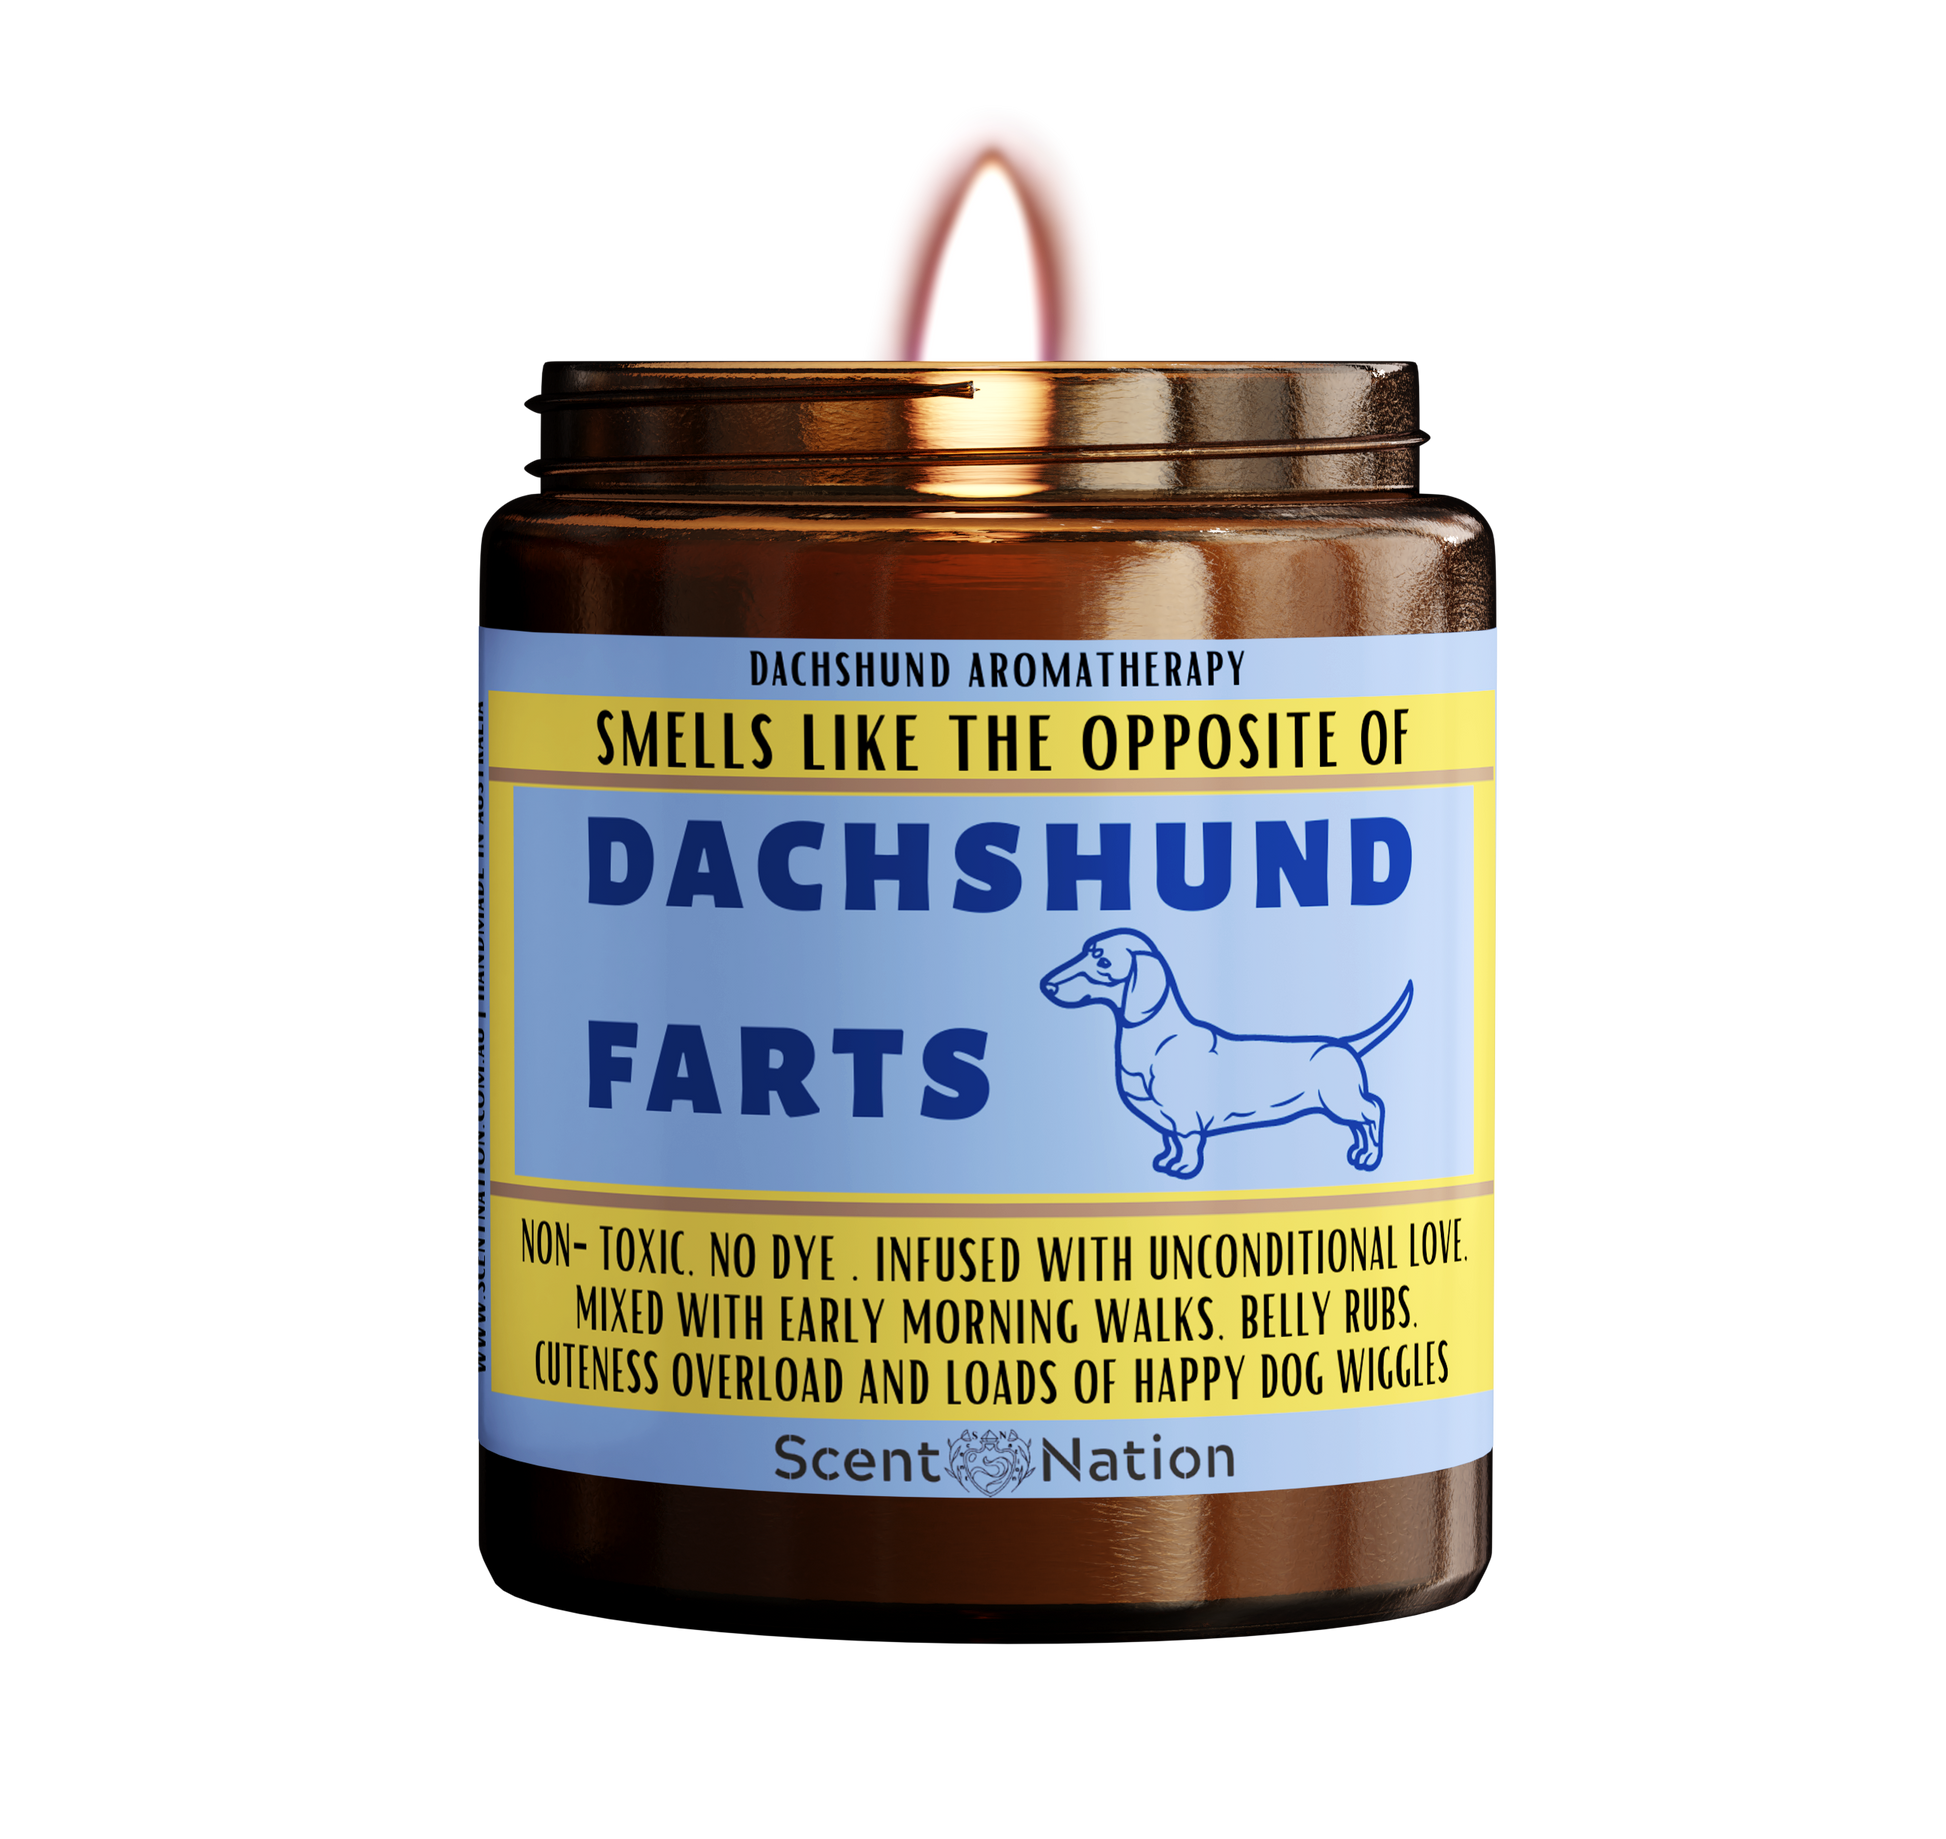 Dachshund candle - perfect gifts for dog lovers in Australia 